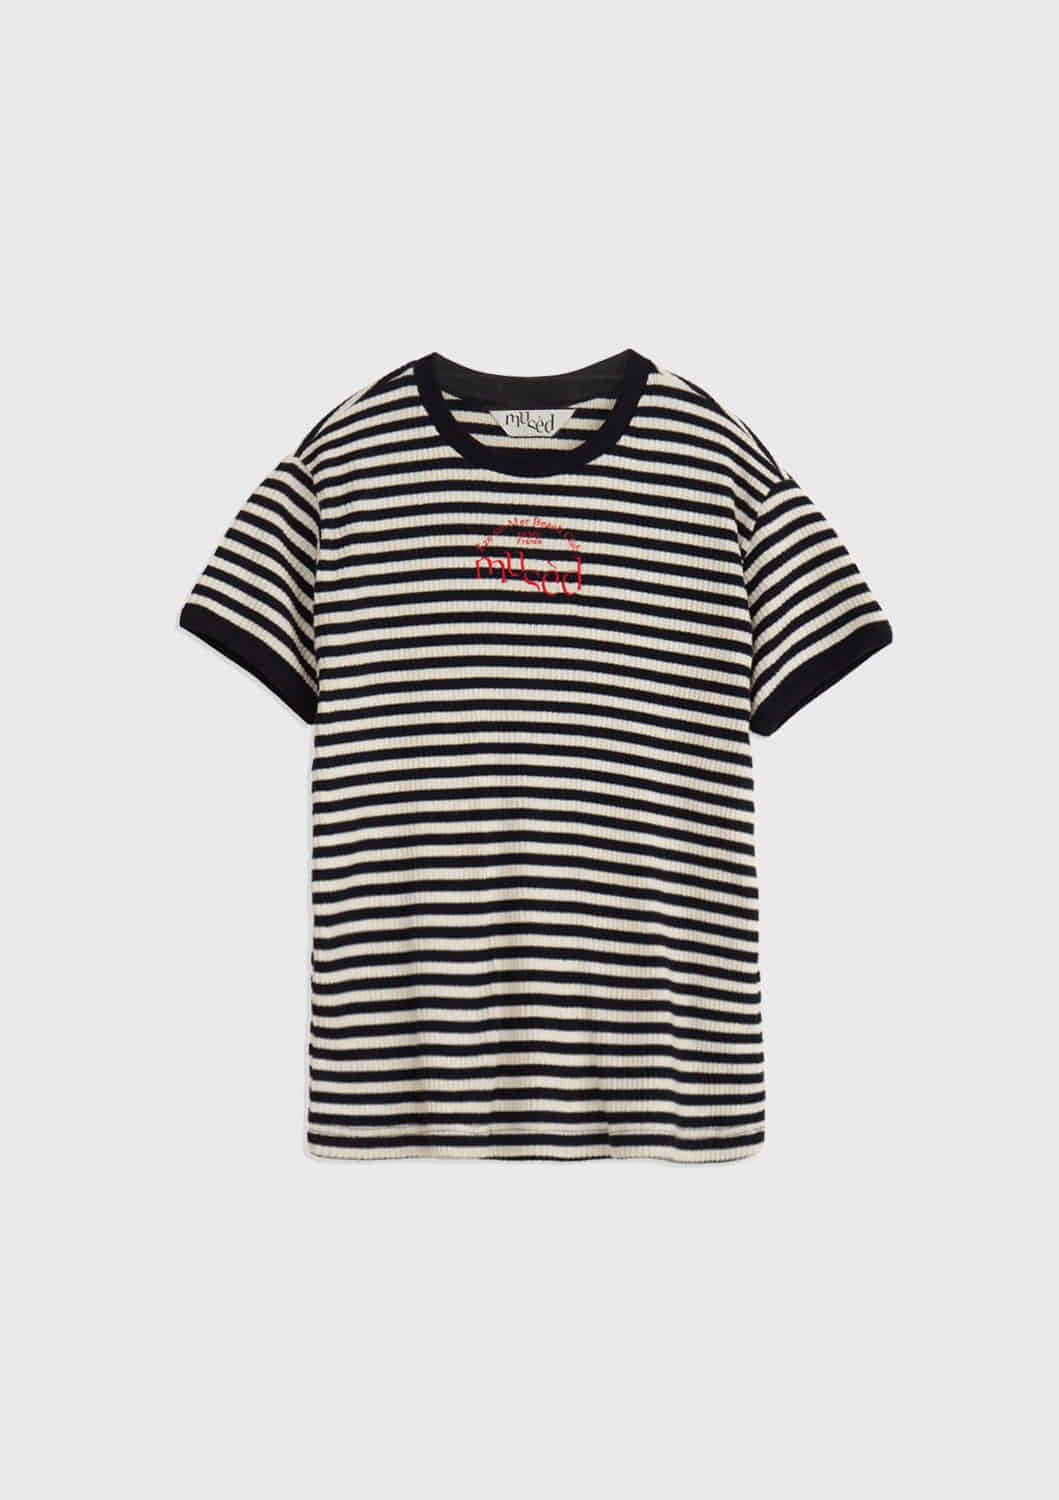 Contrast Rib Patched T-shirt - Navy Stripe